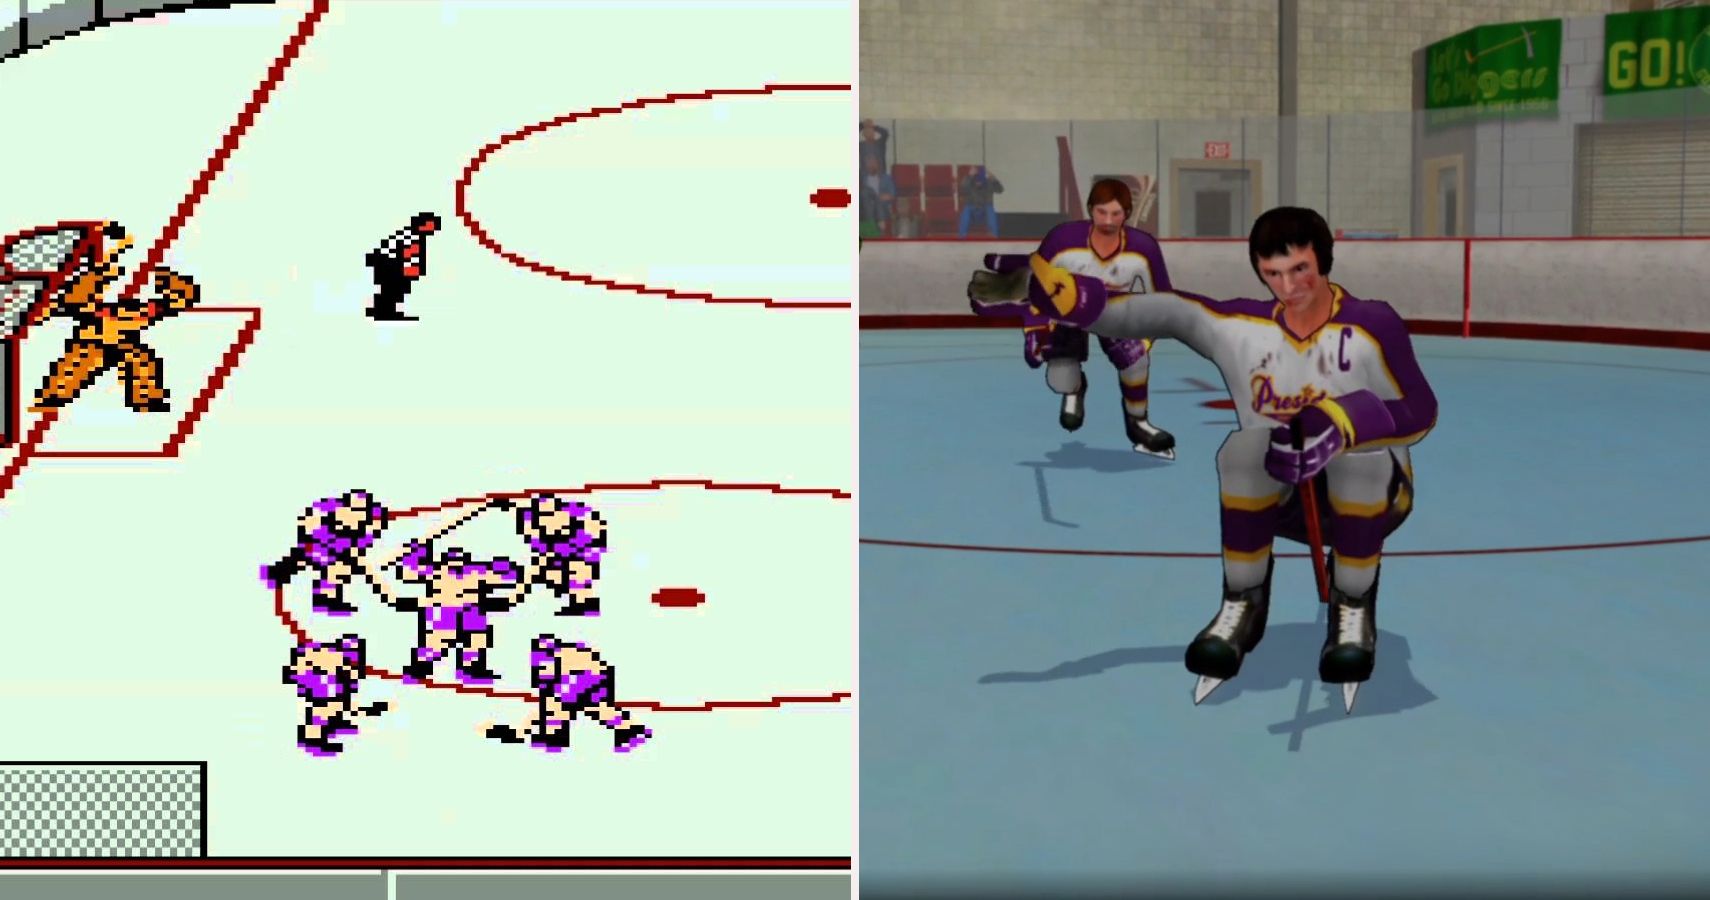 ARE NHL VIDEO GAMES NOT AS FUN AS THEY USED TO BE? 